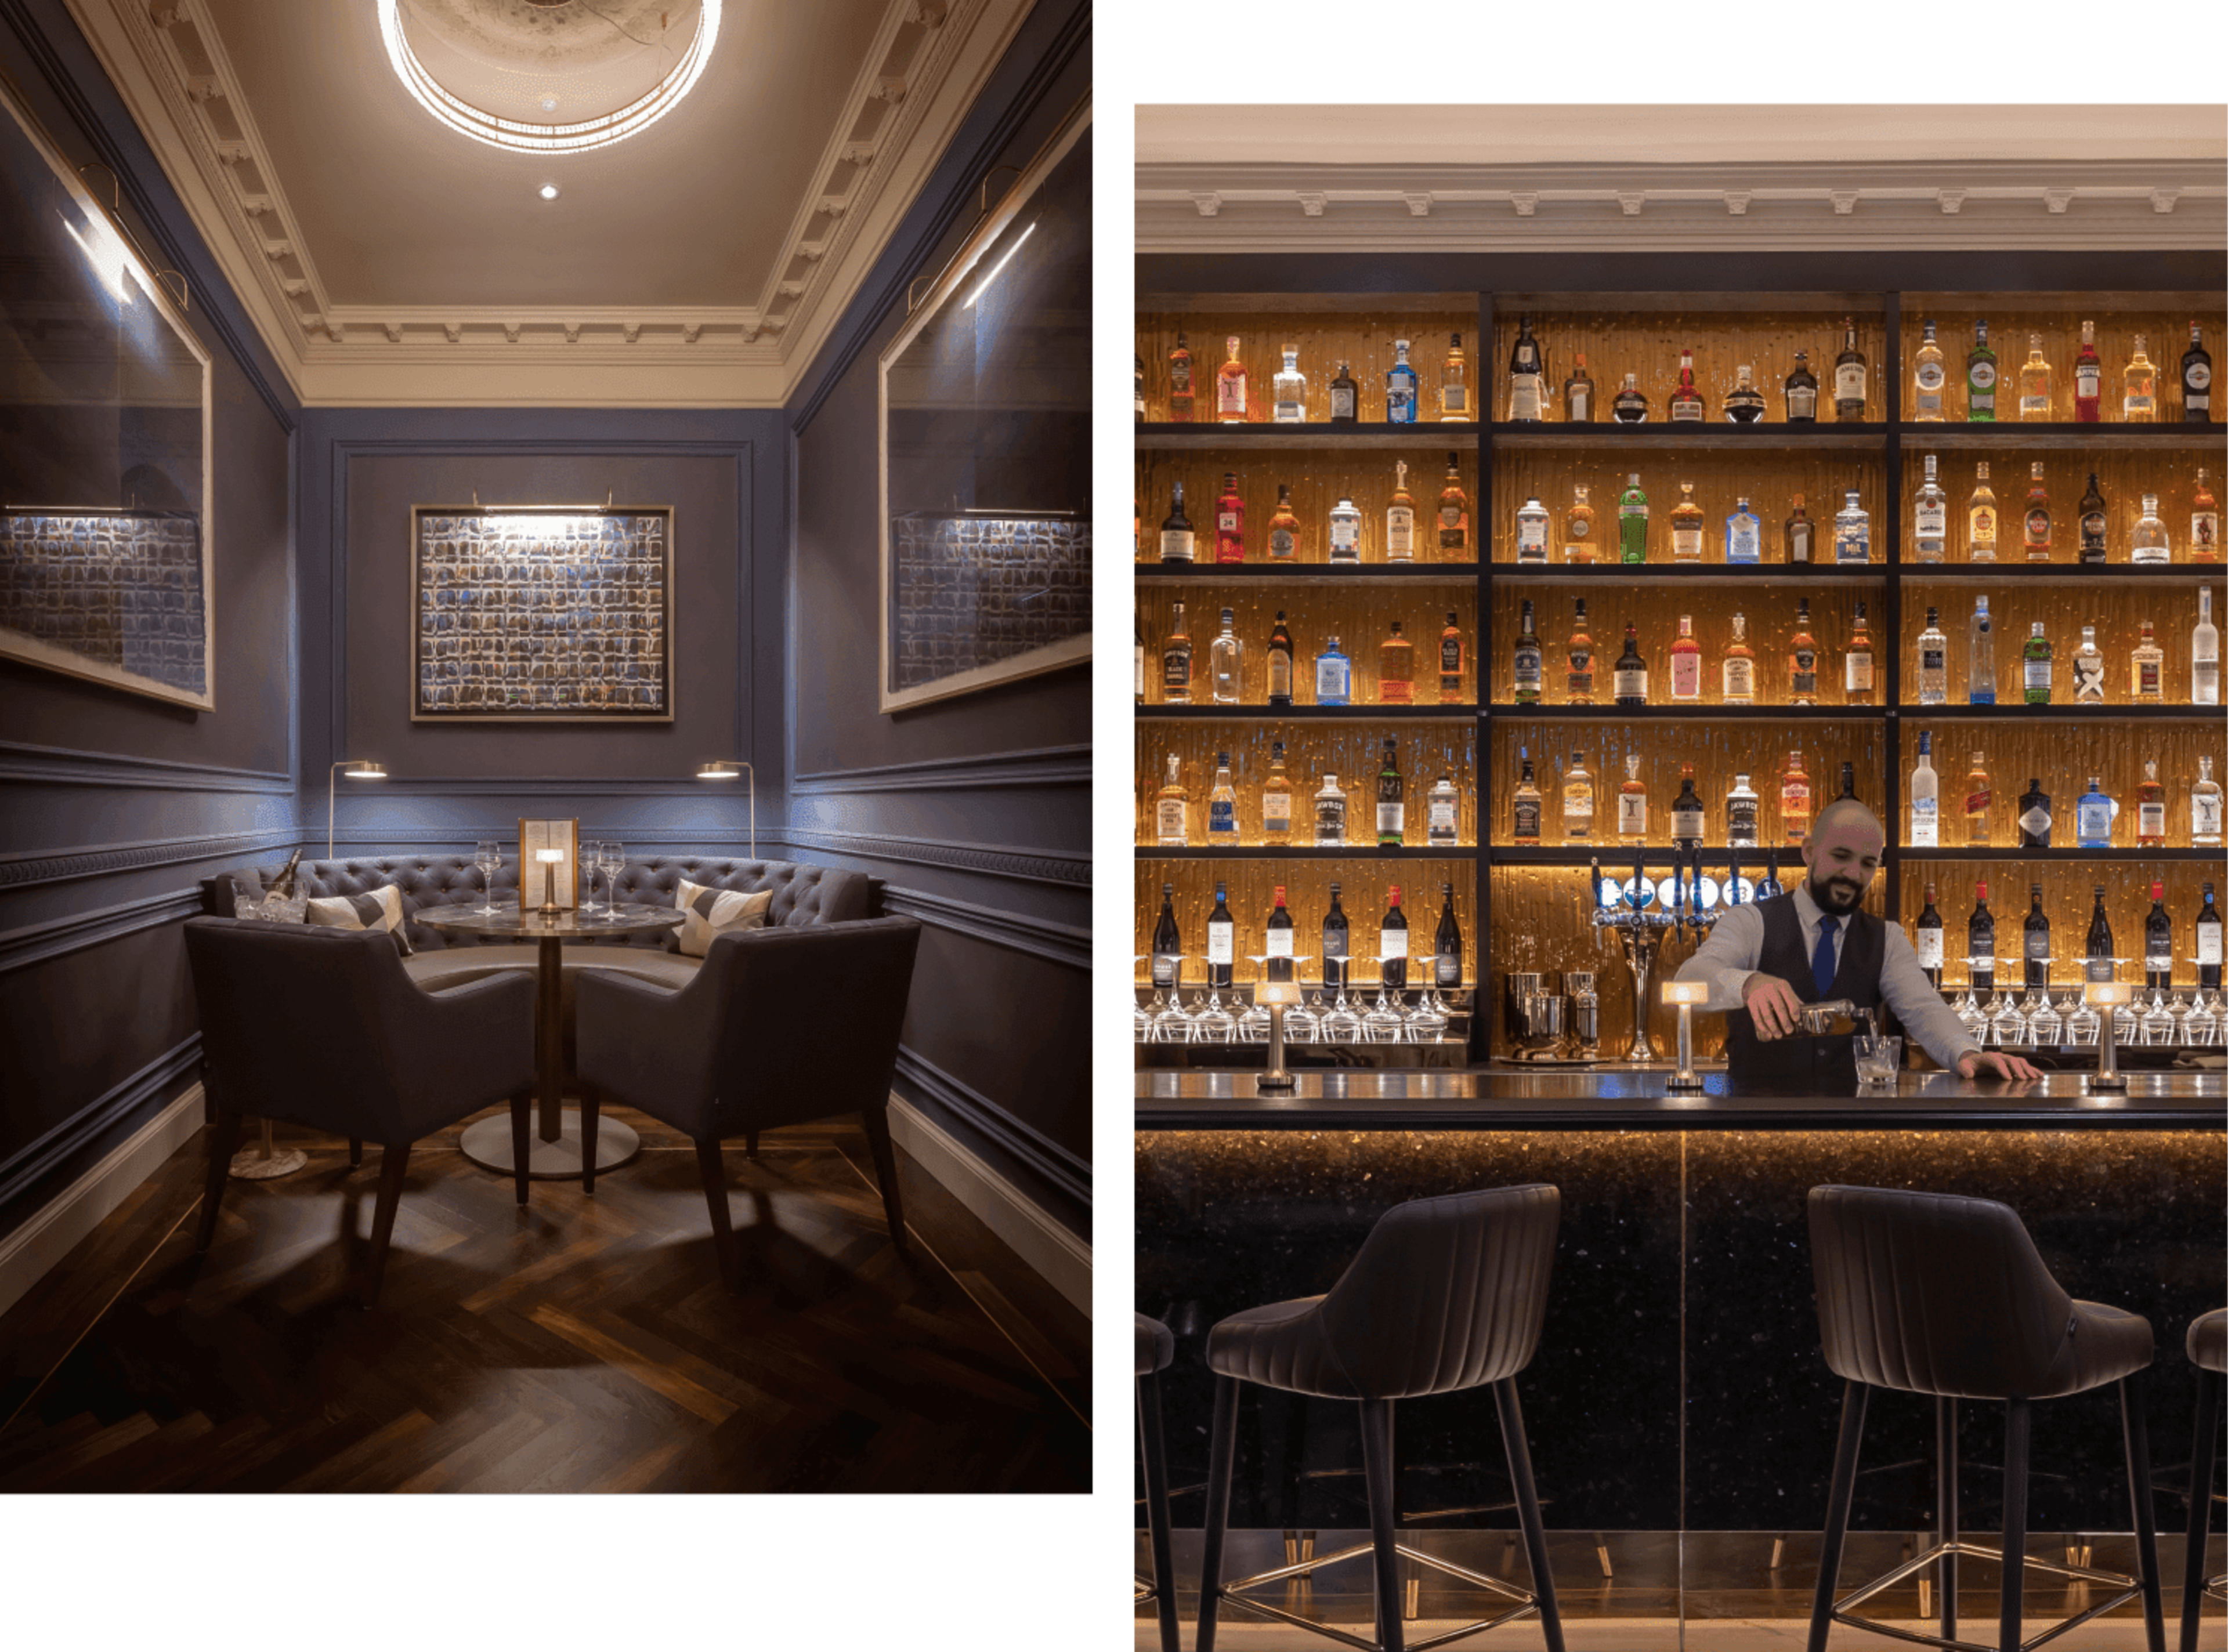 Images of Belvedere Hotel's lounge area and Bloom Bar